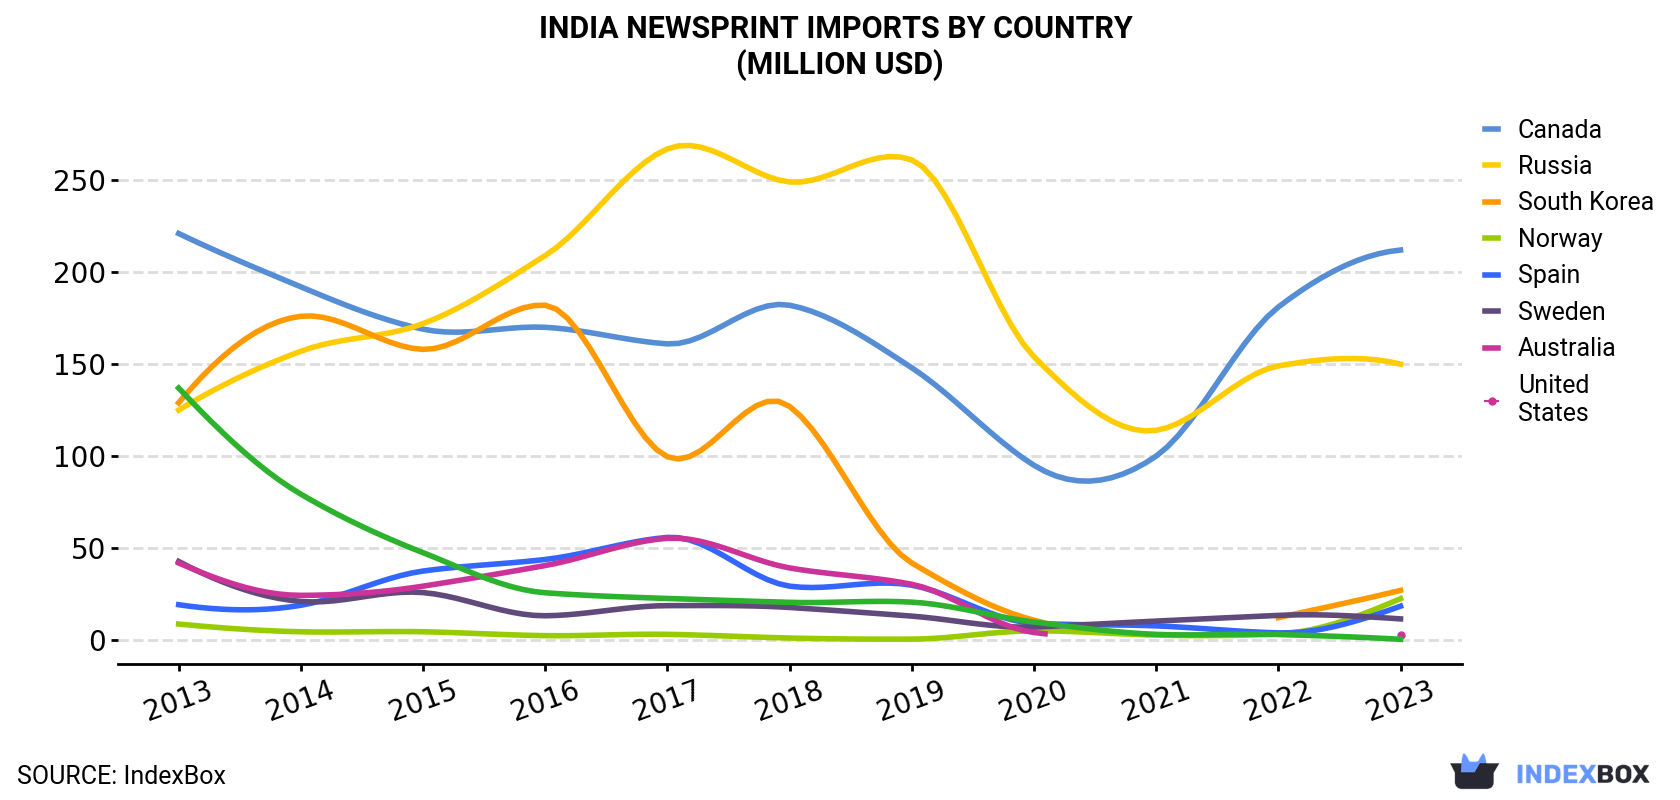 India Newsprint Imports By Country (Million USD)